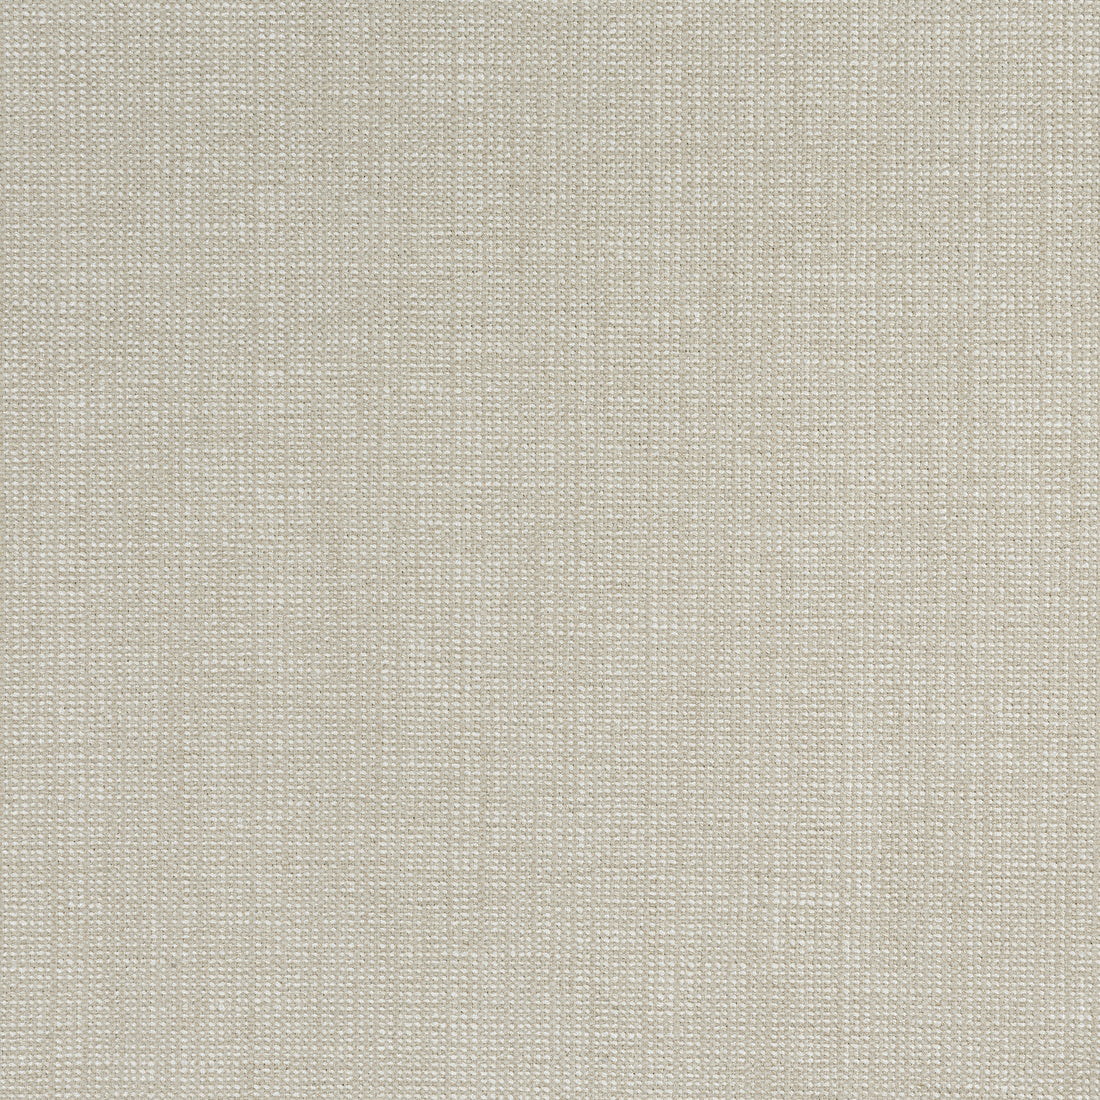 Sacchi fabric in stone color - pattern number W8755 - by Thibaut in the Haven Textures collection